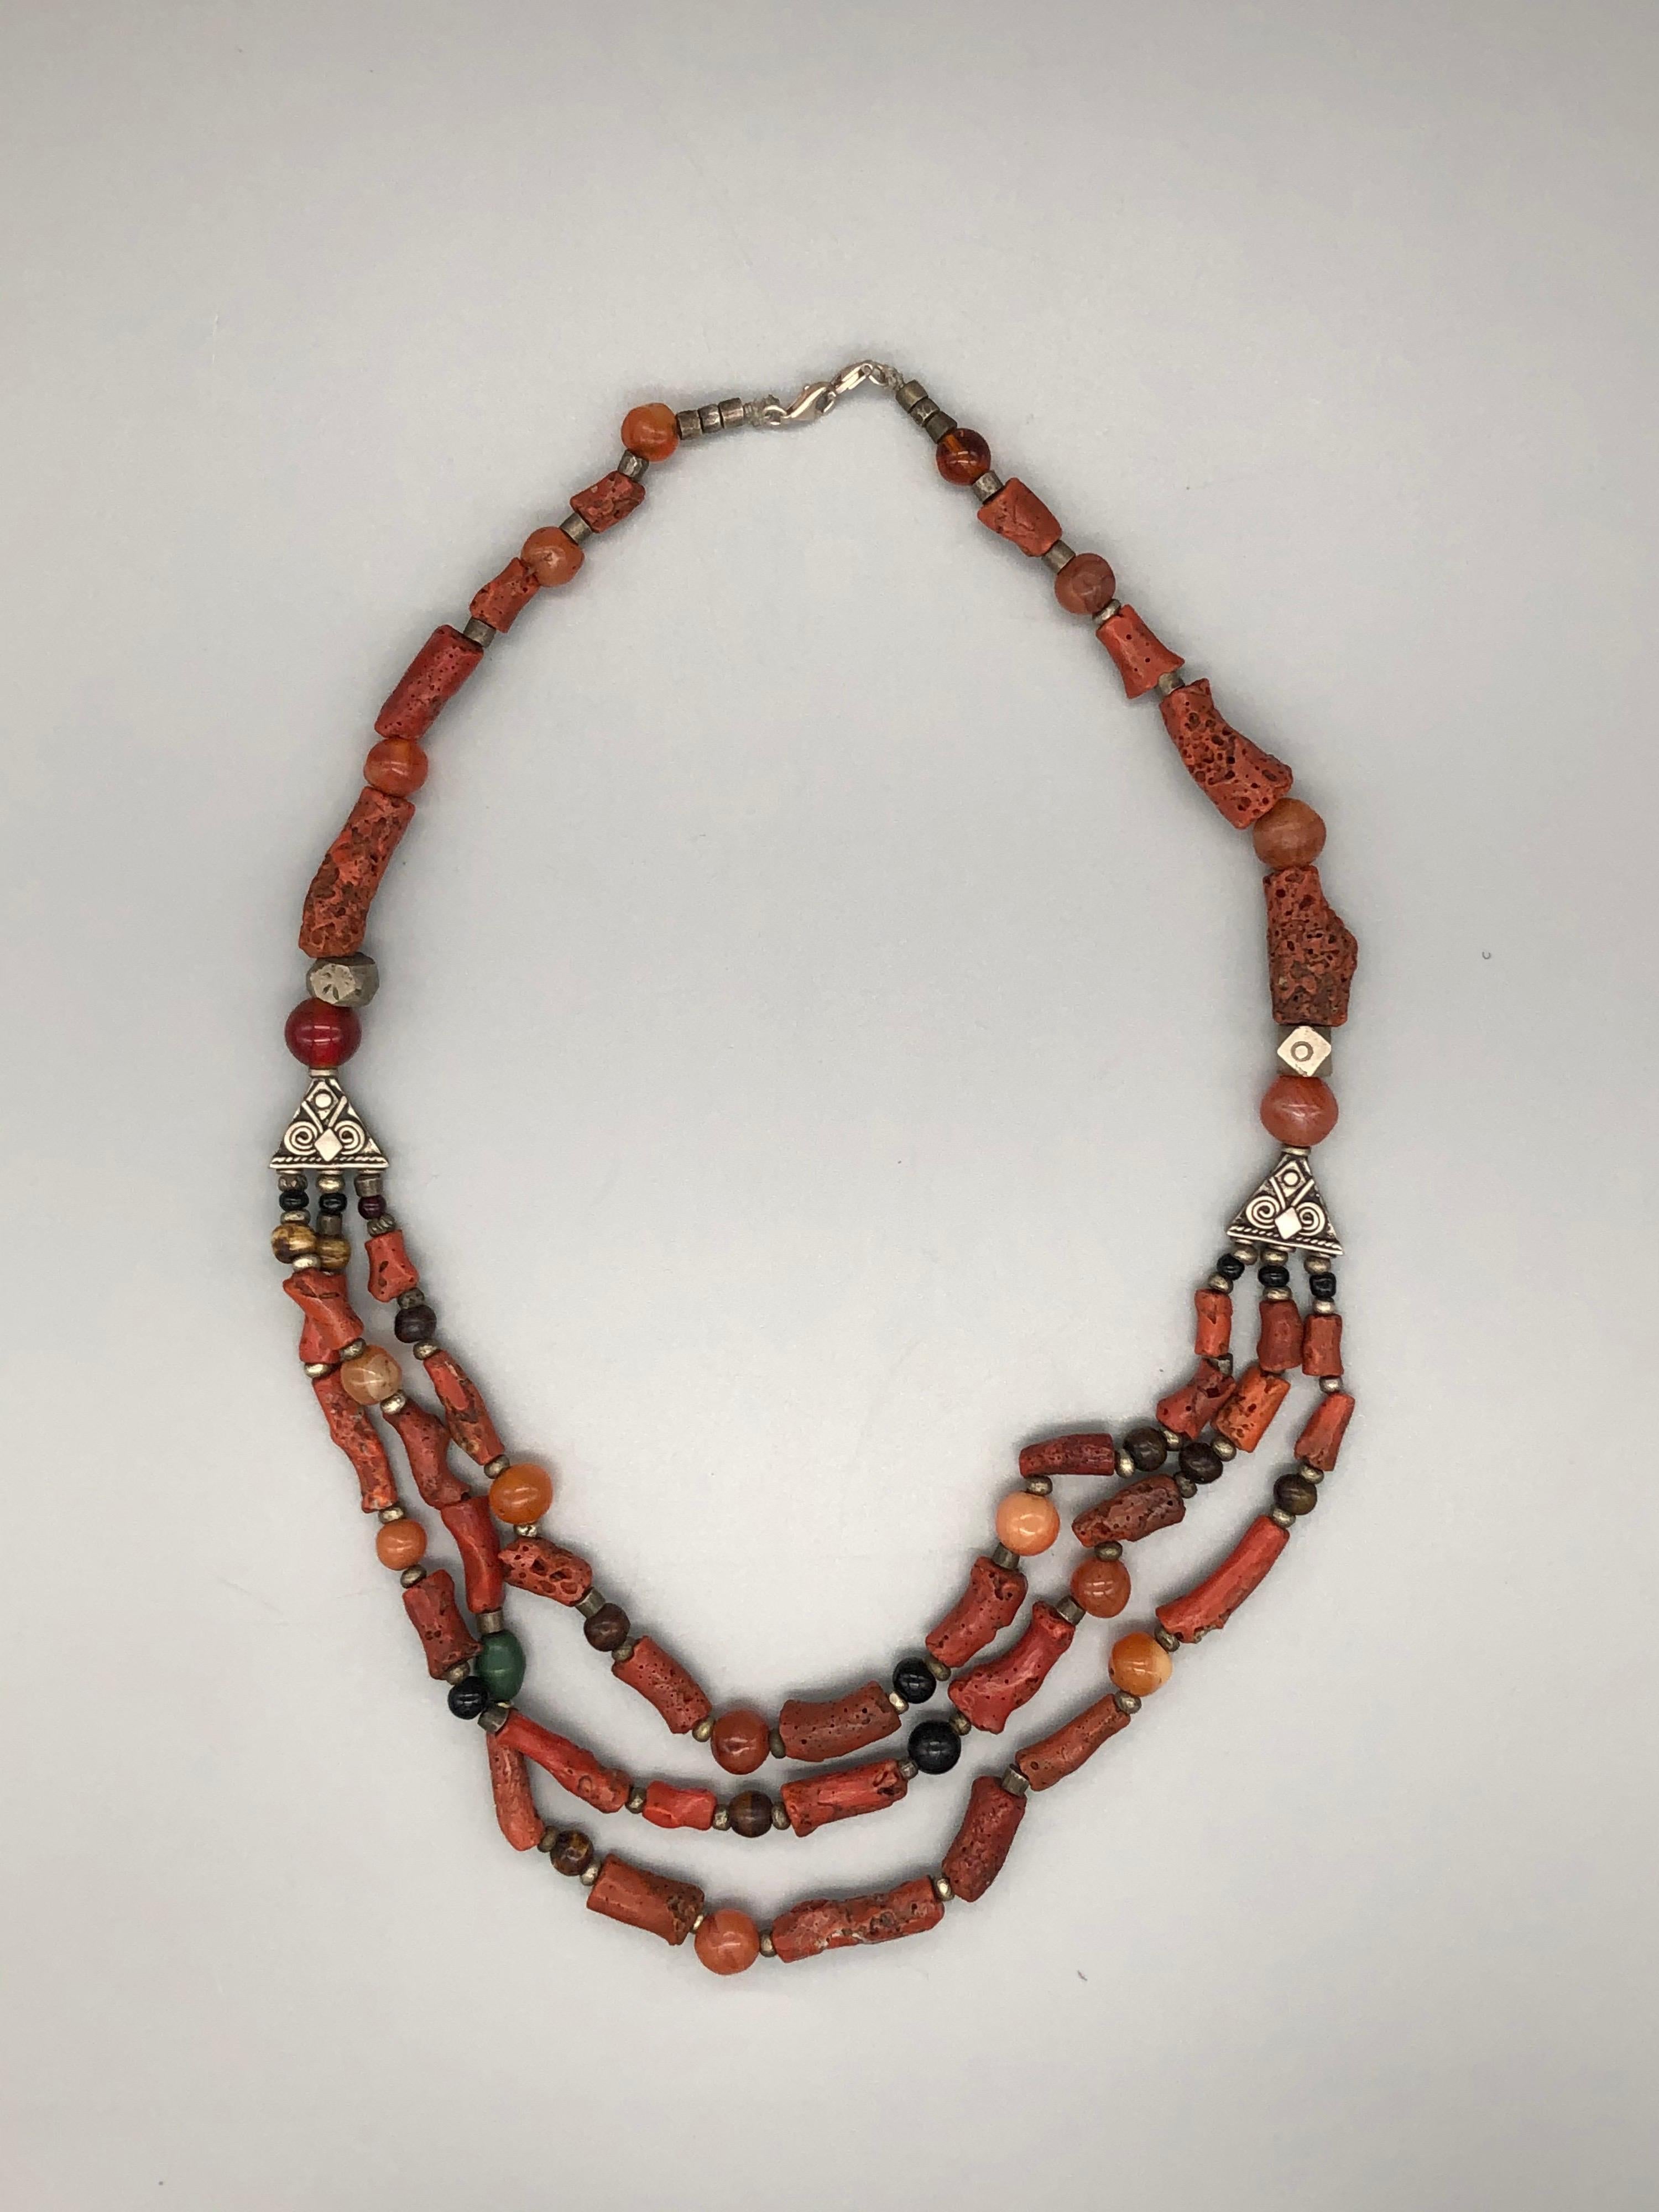 Vintage Moroccan Branch Coral Necklace, Handmade Multi-Strand, Silver, Agate For Sale 2